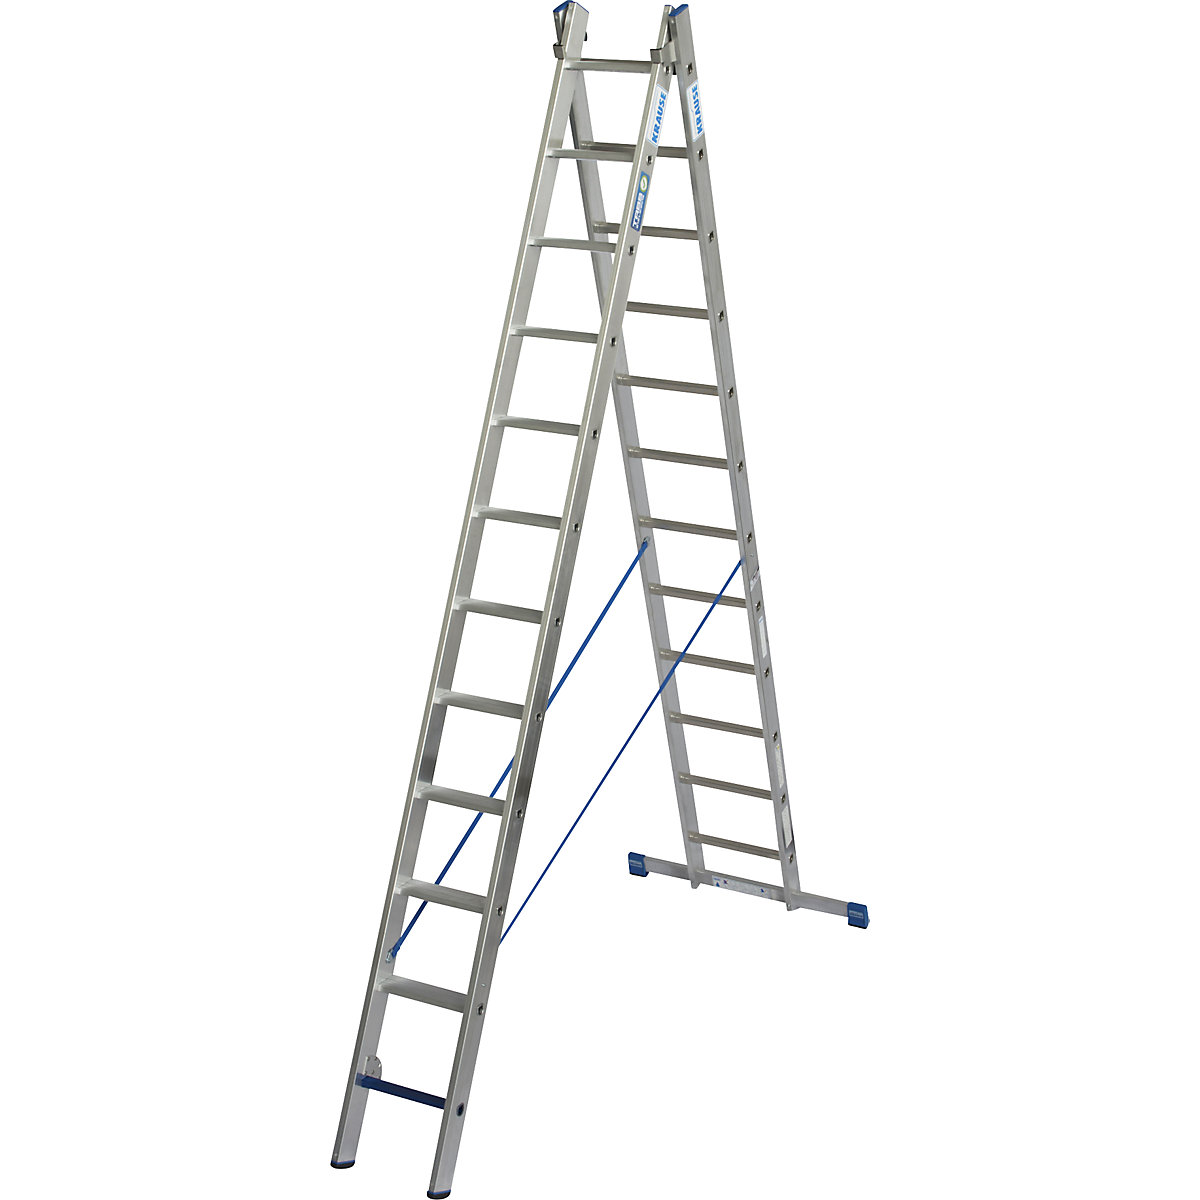 KRAUSE – STABILO + S professional multi-purpose ladder, 2 parts, step-rung combination, 2 x 12 steps/rungs